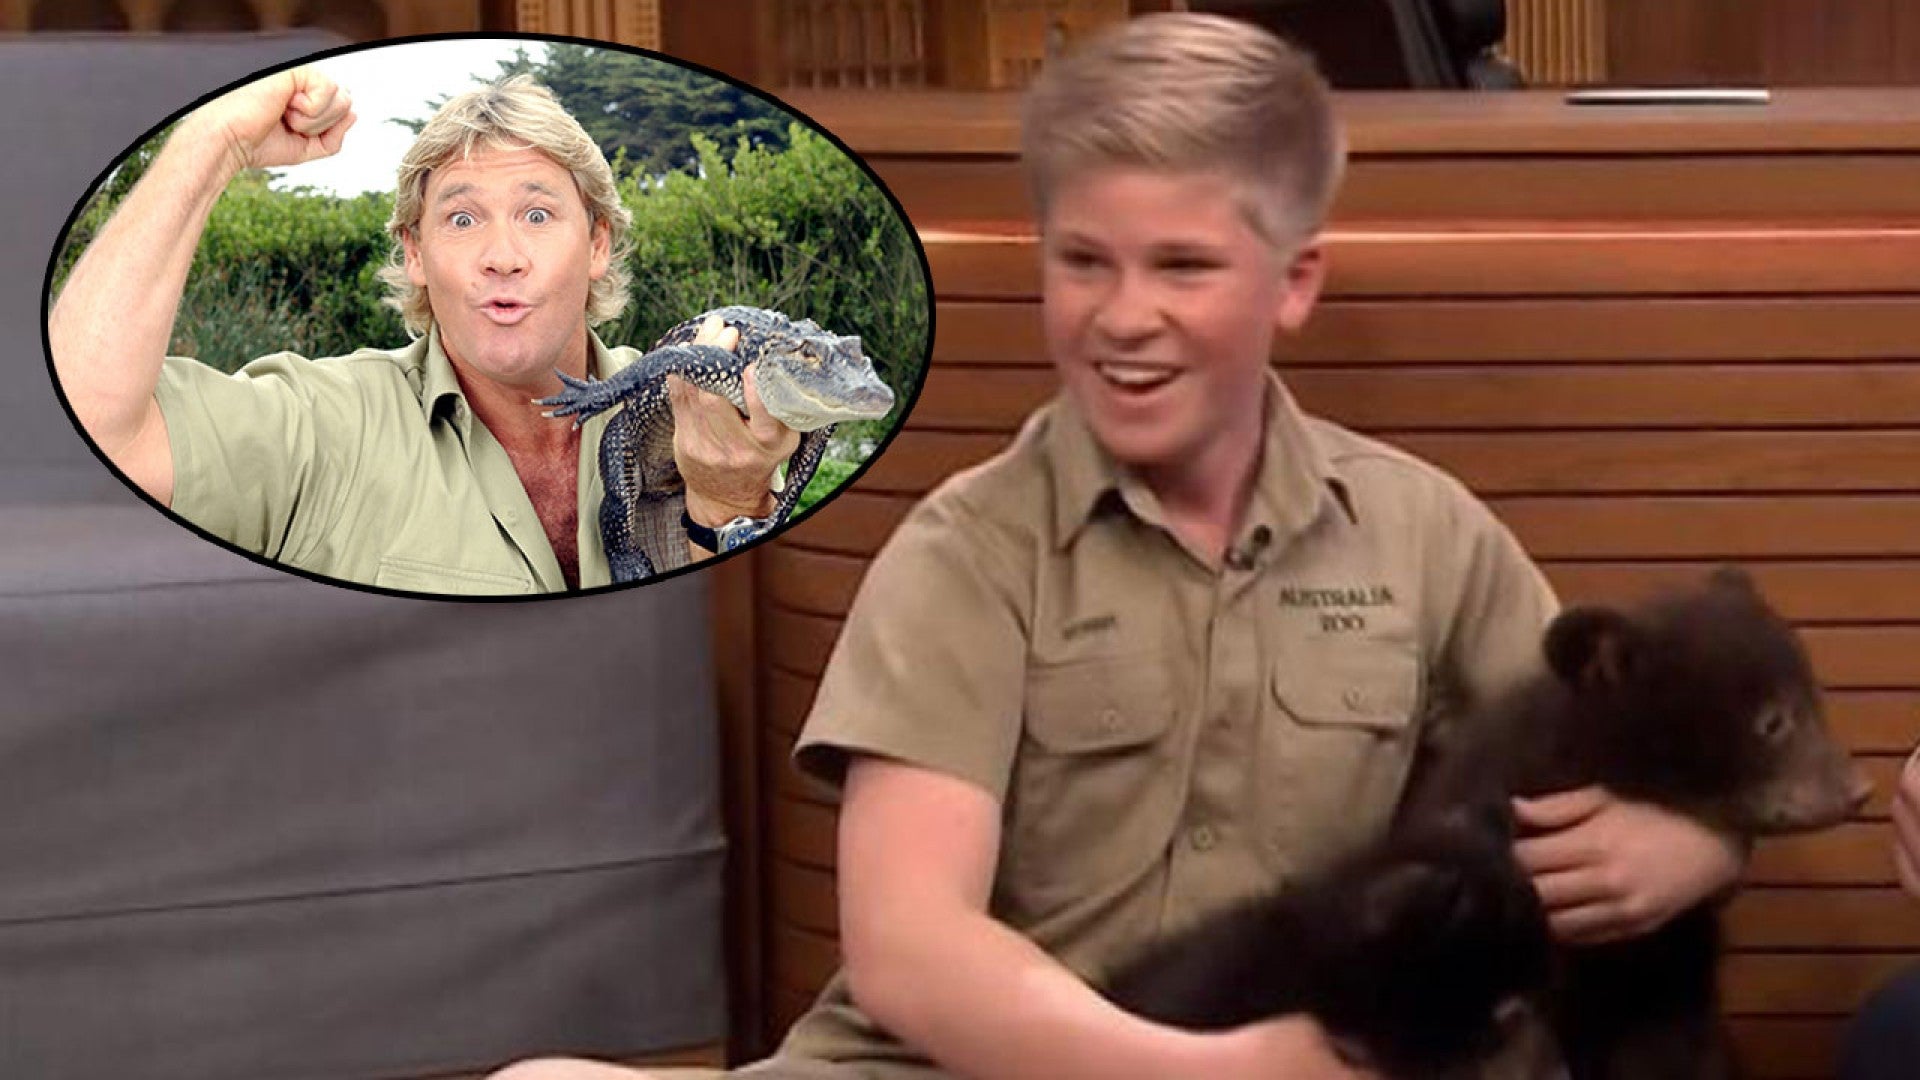 Robert Irwin Channels Croc Hunter Dad, Stops Bear Cubs From Chewing on  Jimmy Fallon on 'Tonight Show' | Entertainment Tonight